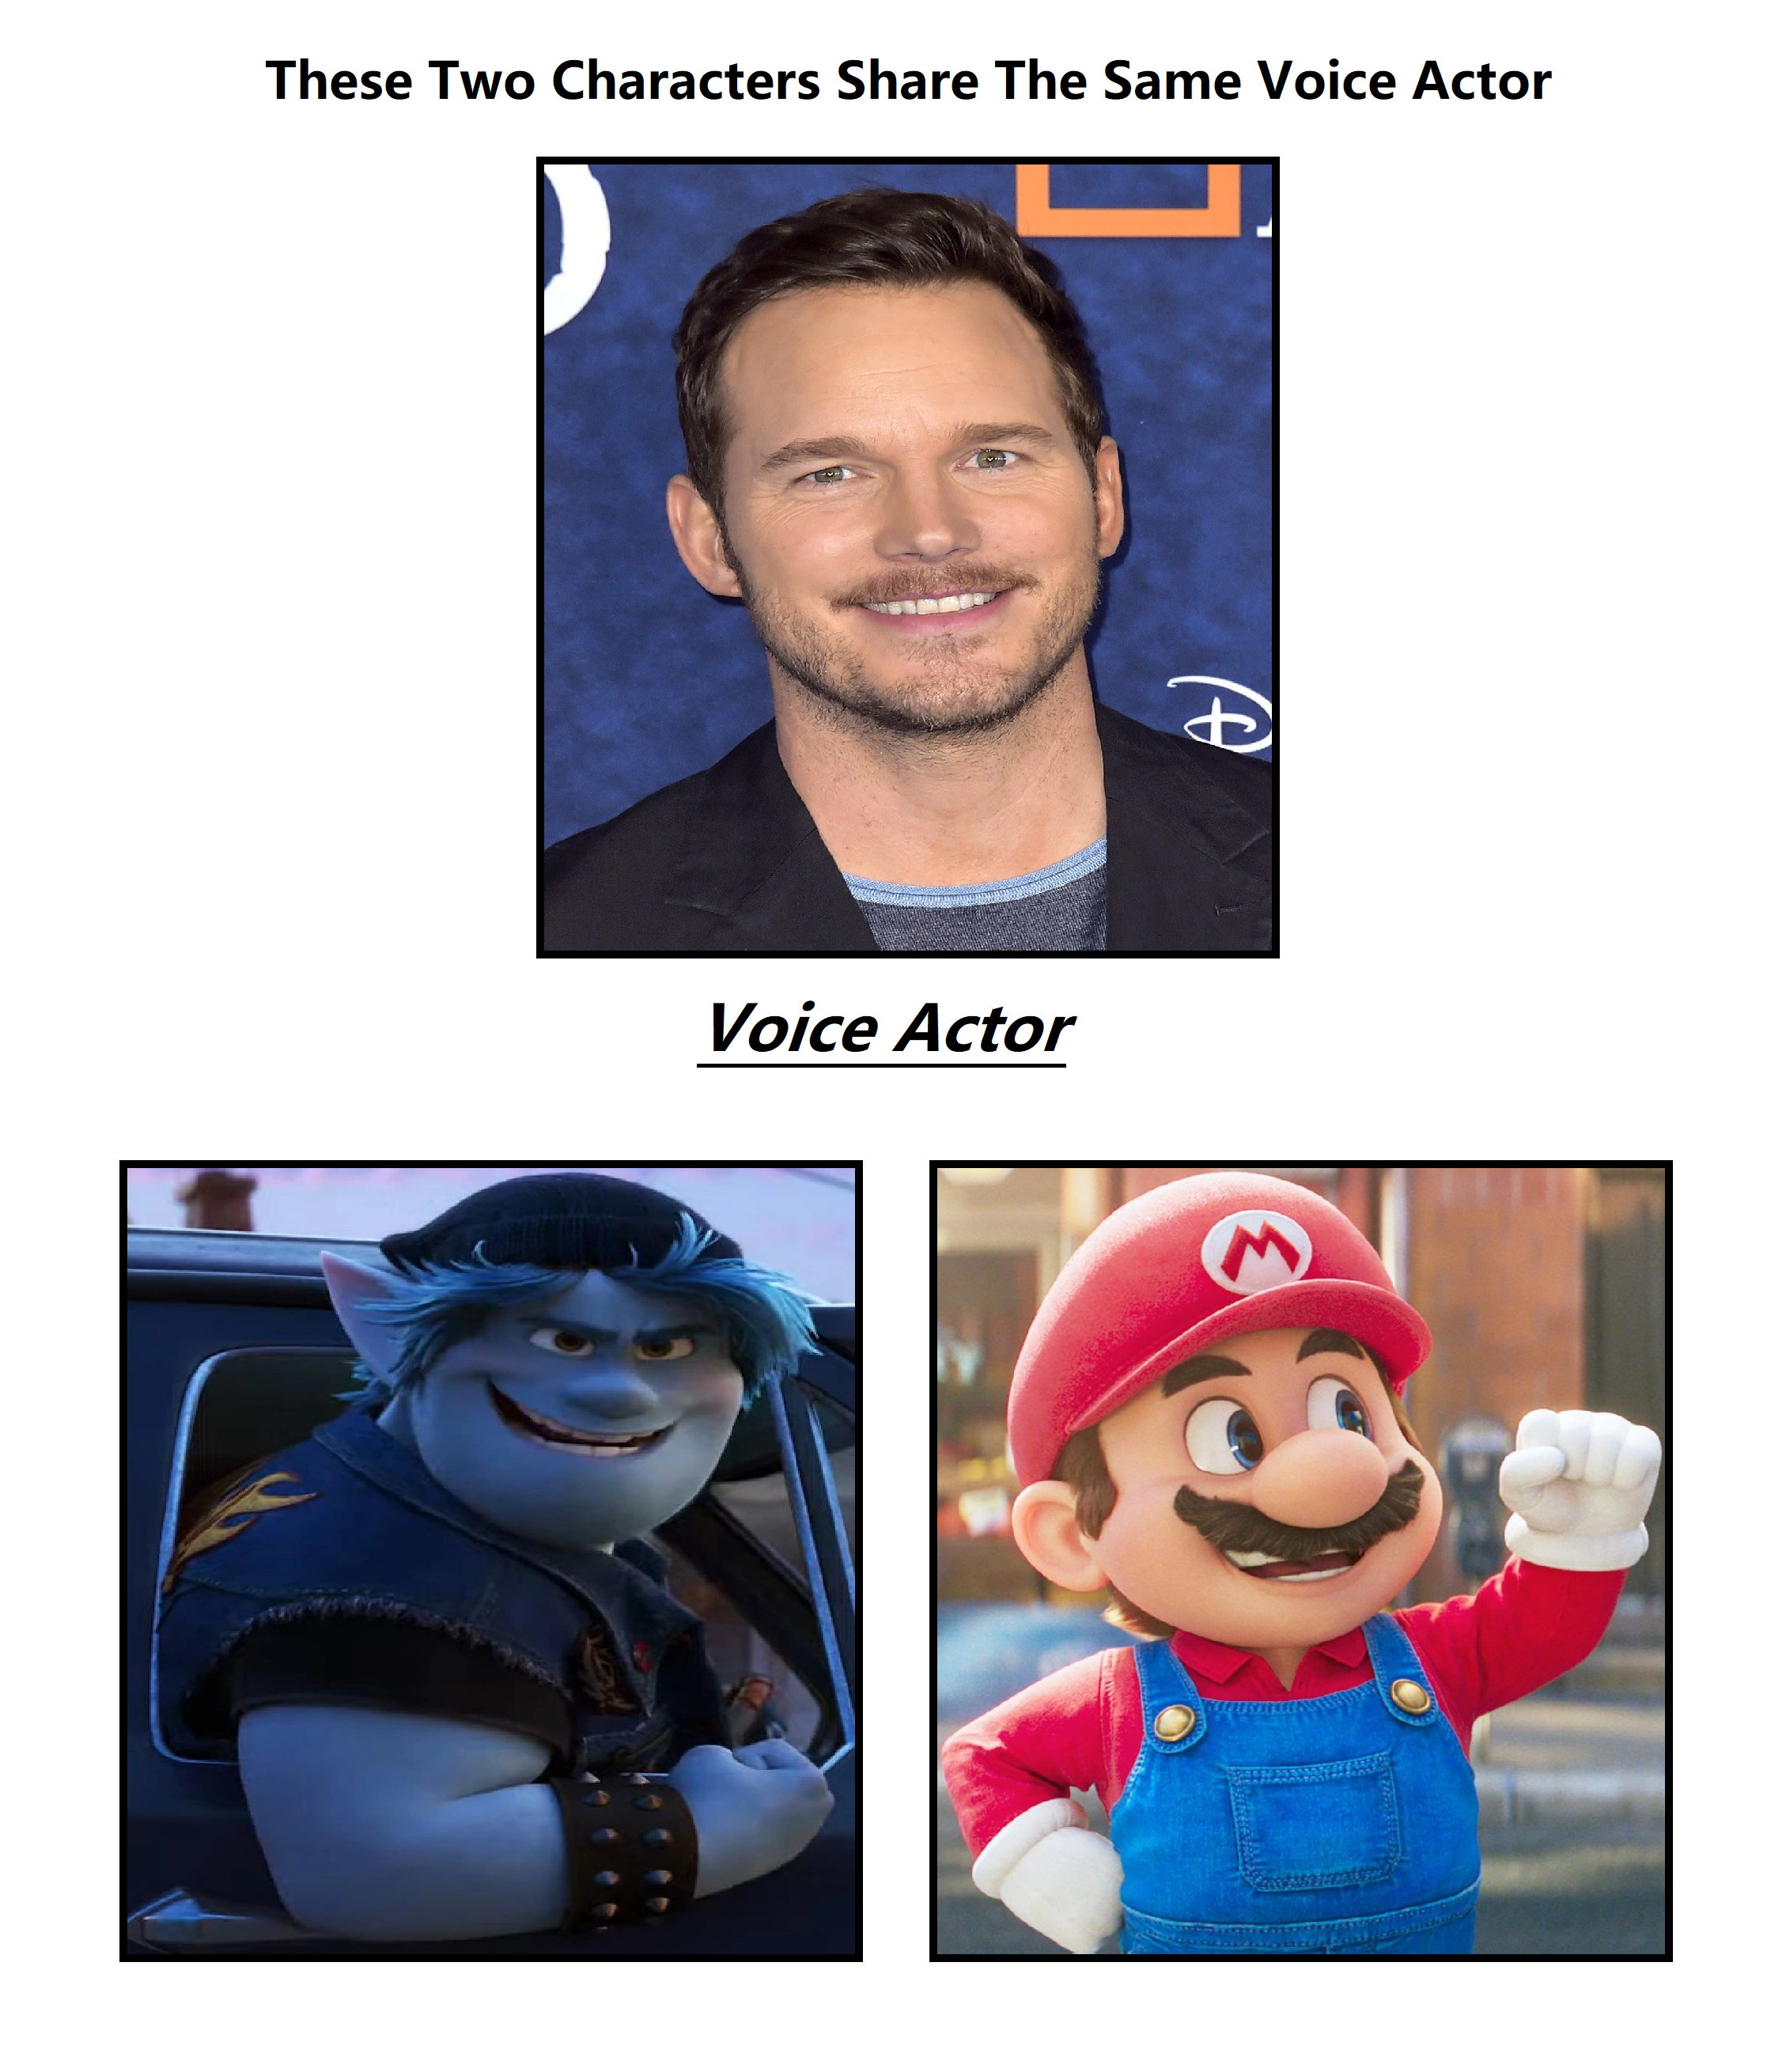 Chris Pratt has been cast as Shadow the Hedgehog in Sonic the